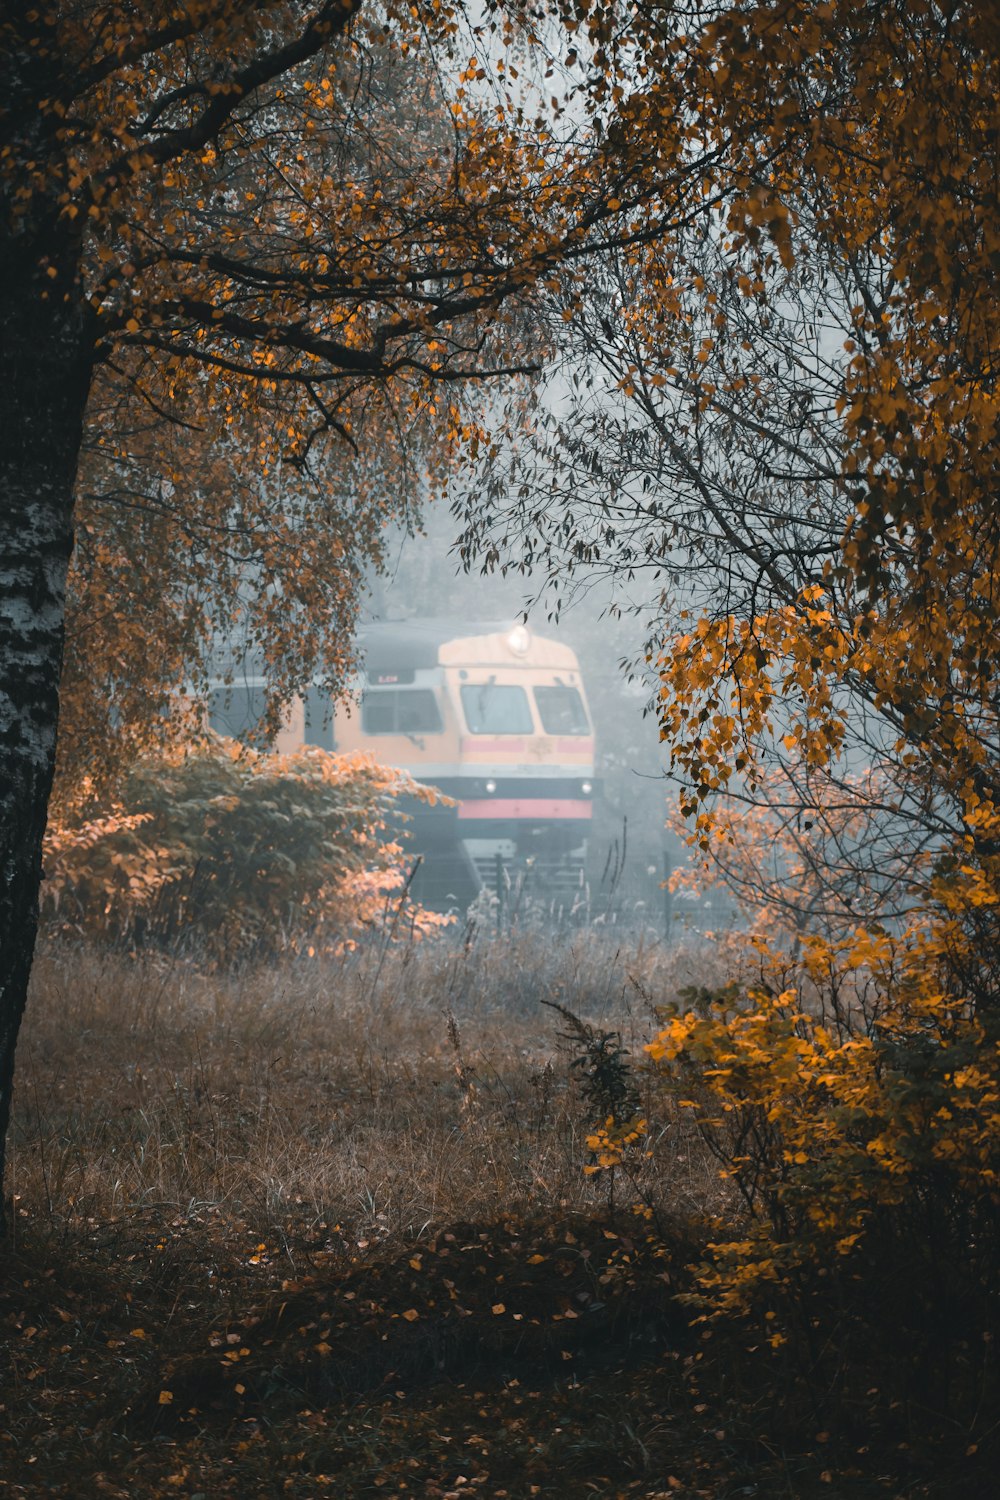 a fire truck parked in a forest